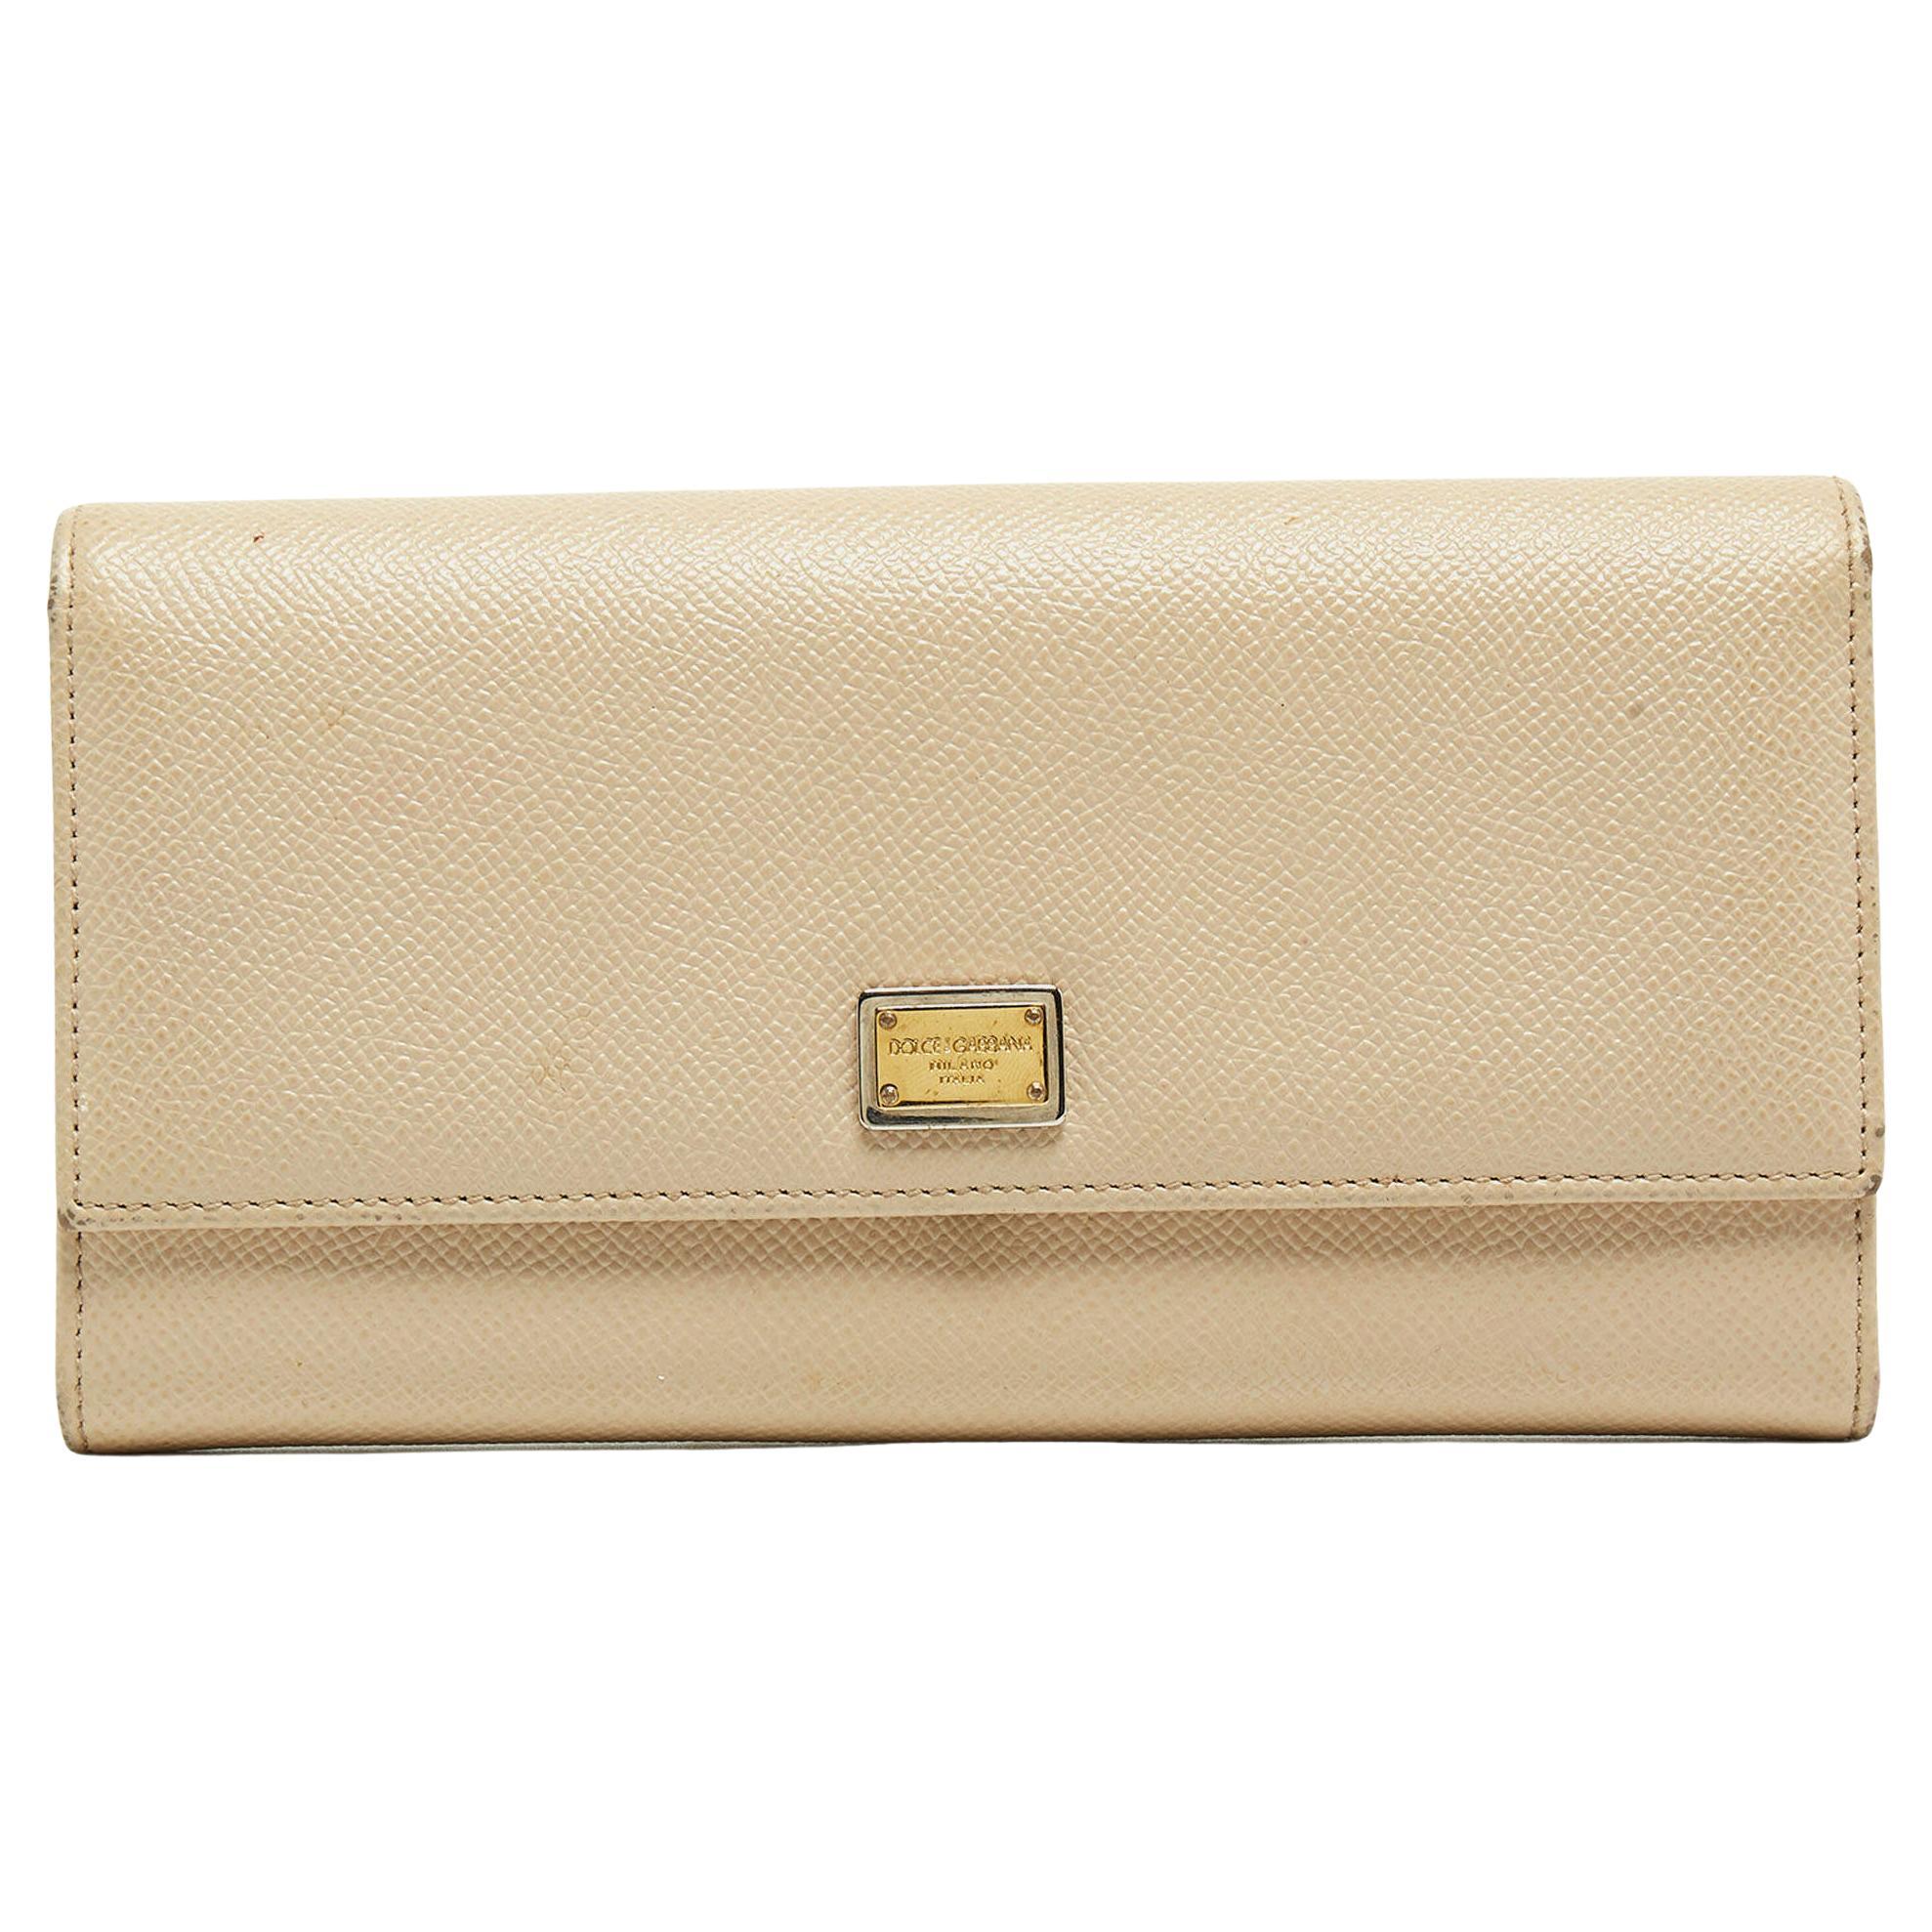 Dolce & Gabbana Beige Leather Dauphine Flap Continental Wallet For Sale